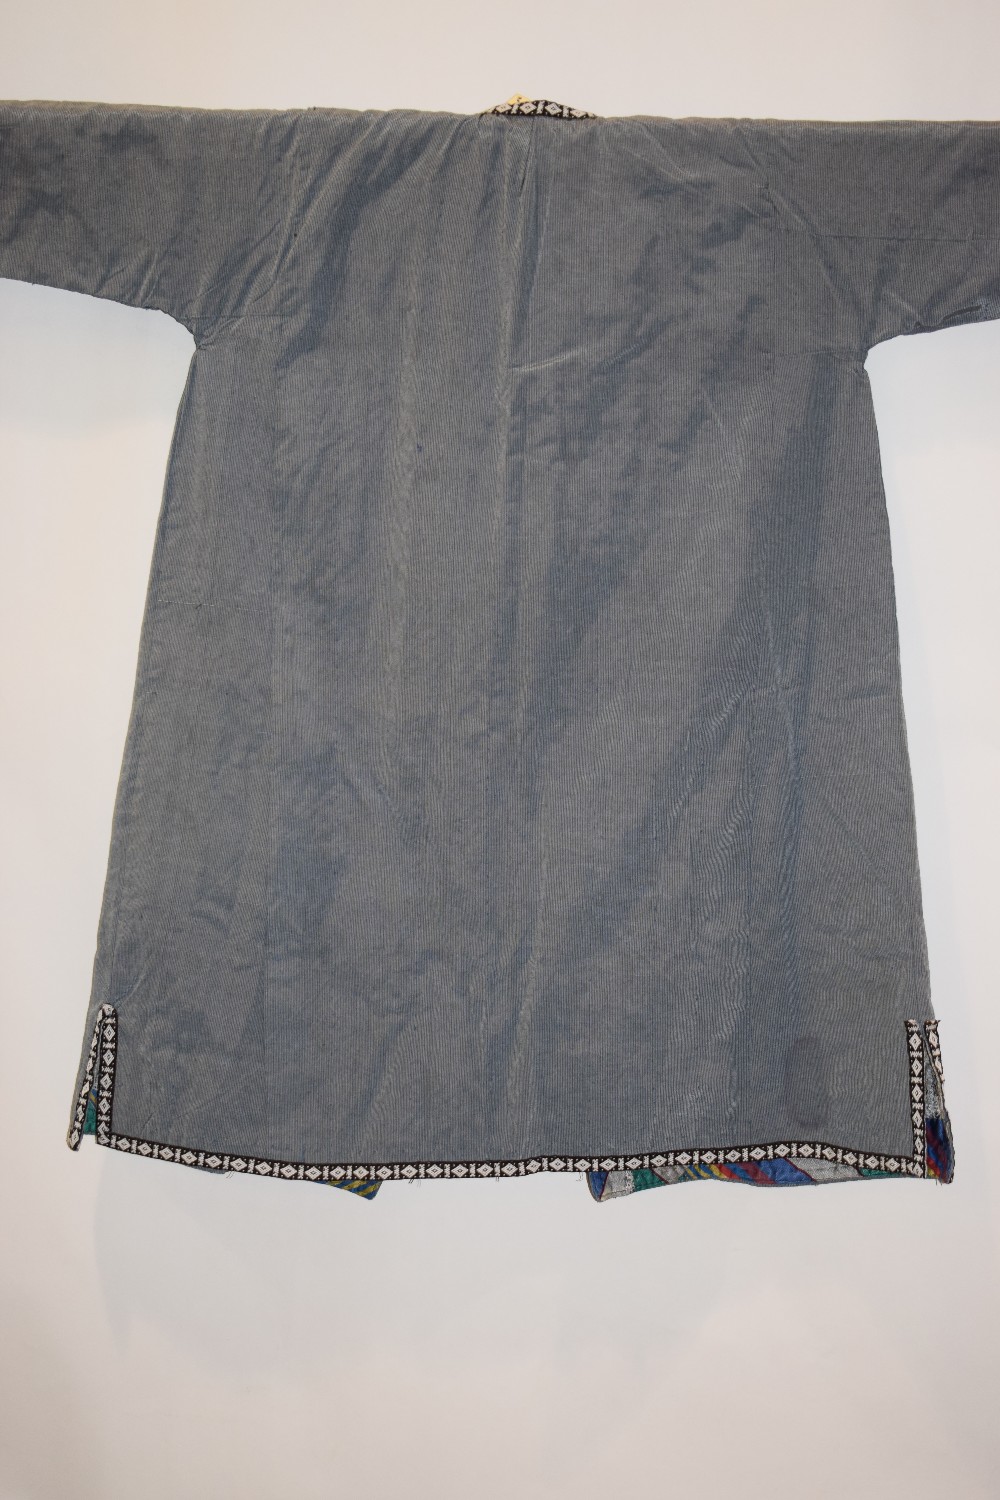 Two Uzbekistan or Afghanistan coats, 20th century, one silk satin with stripes in shades of - Image 15 of 16